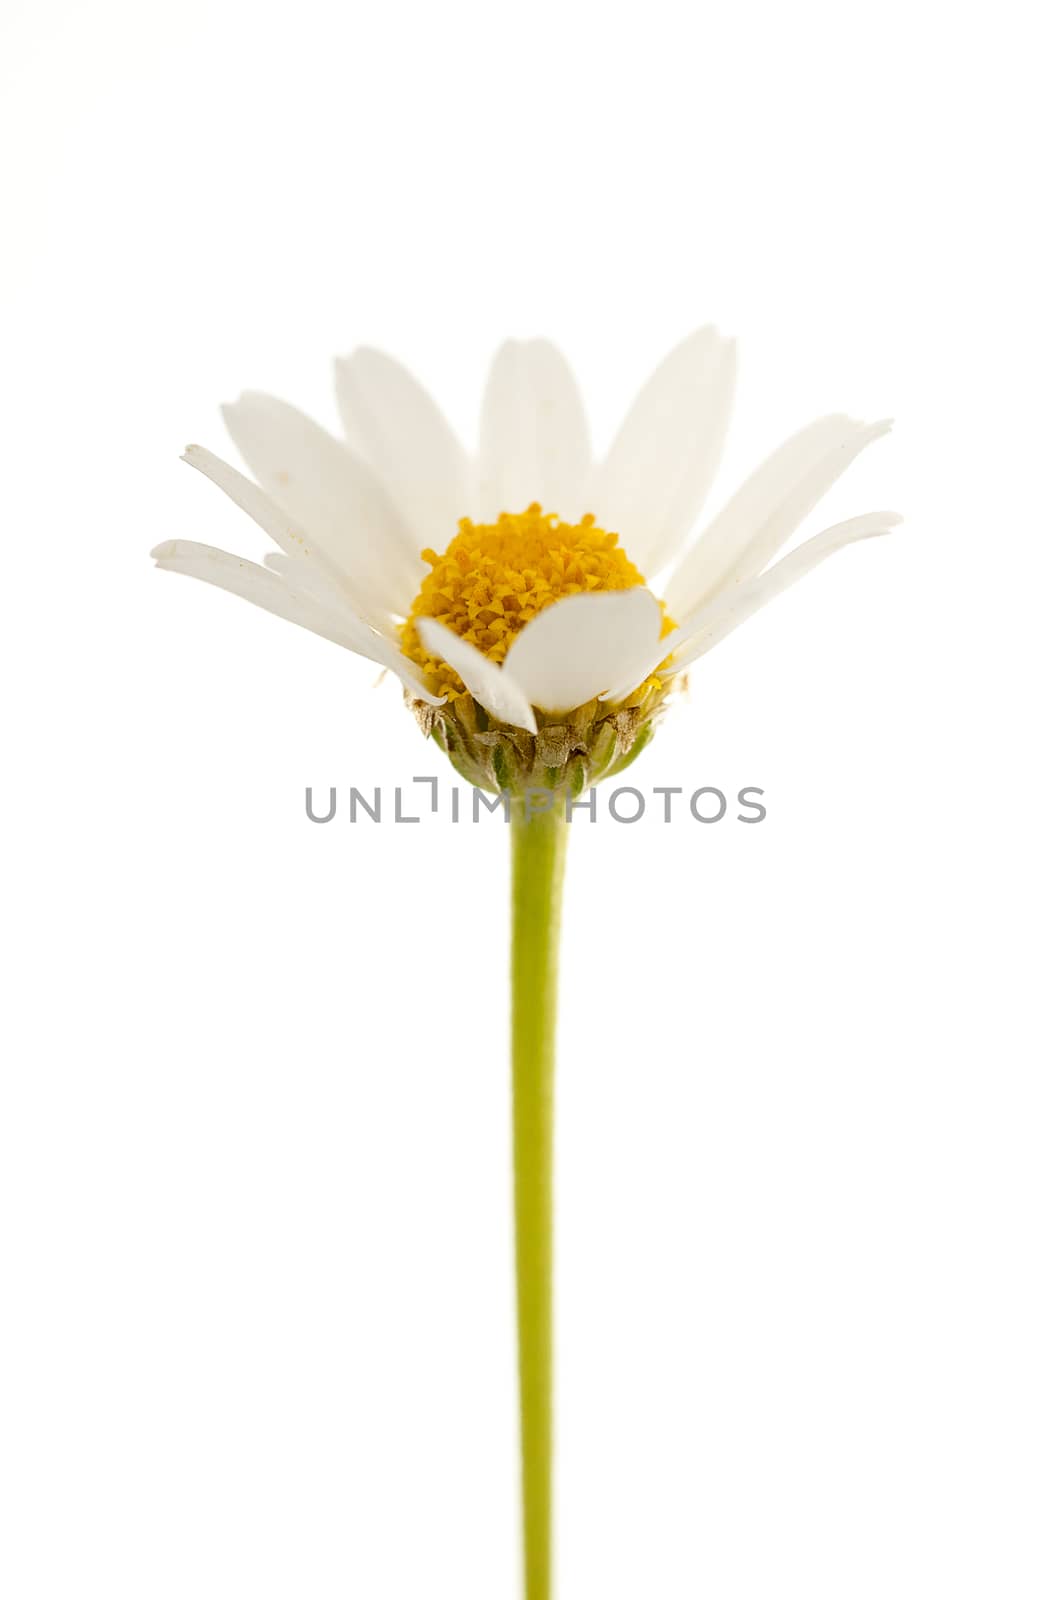 Common daisy (Bellis perennis) with white background by jalonsohu@gmail.com